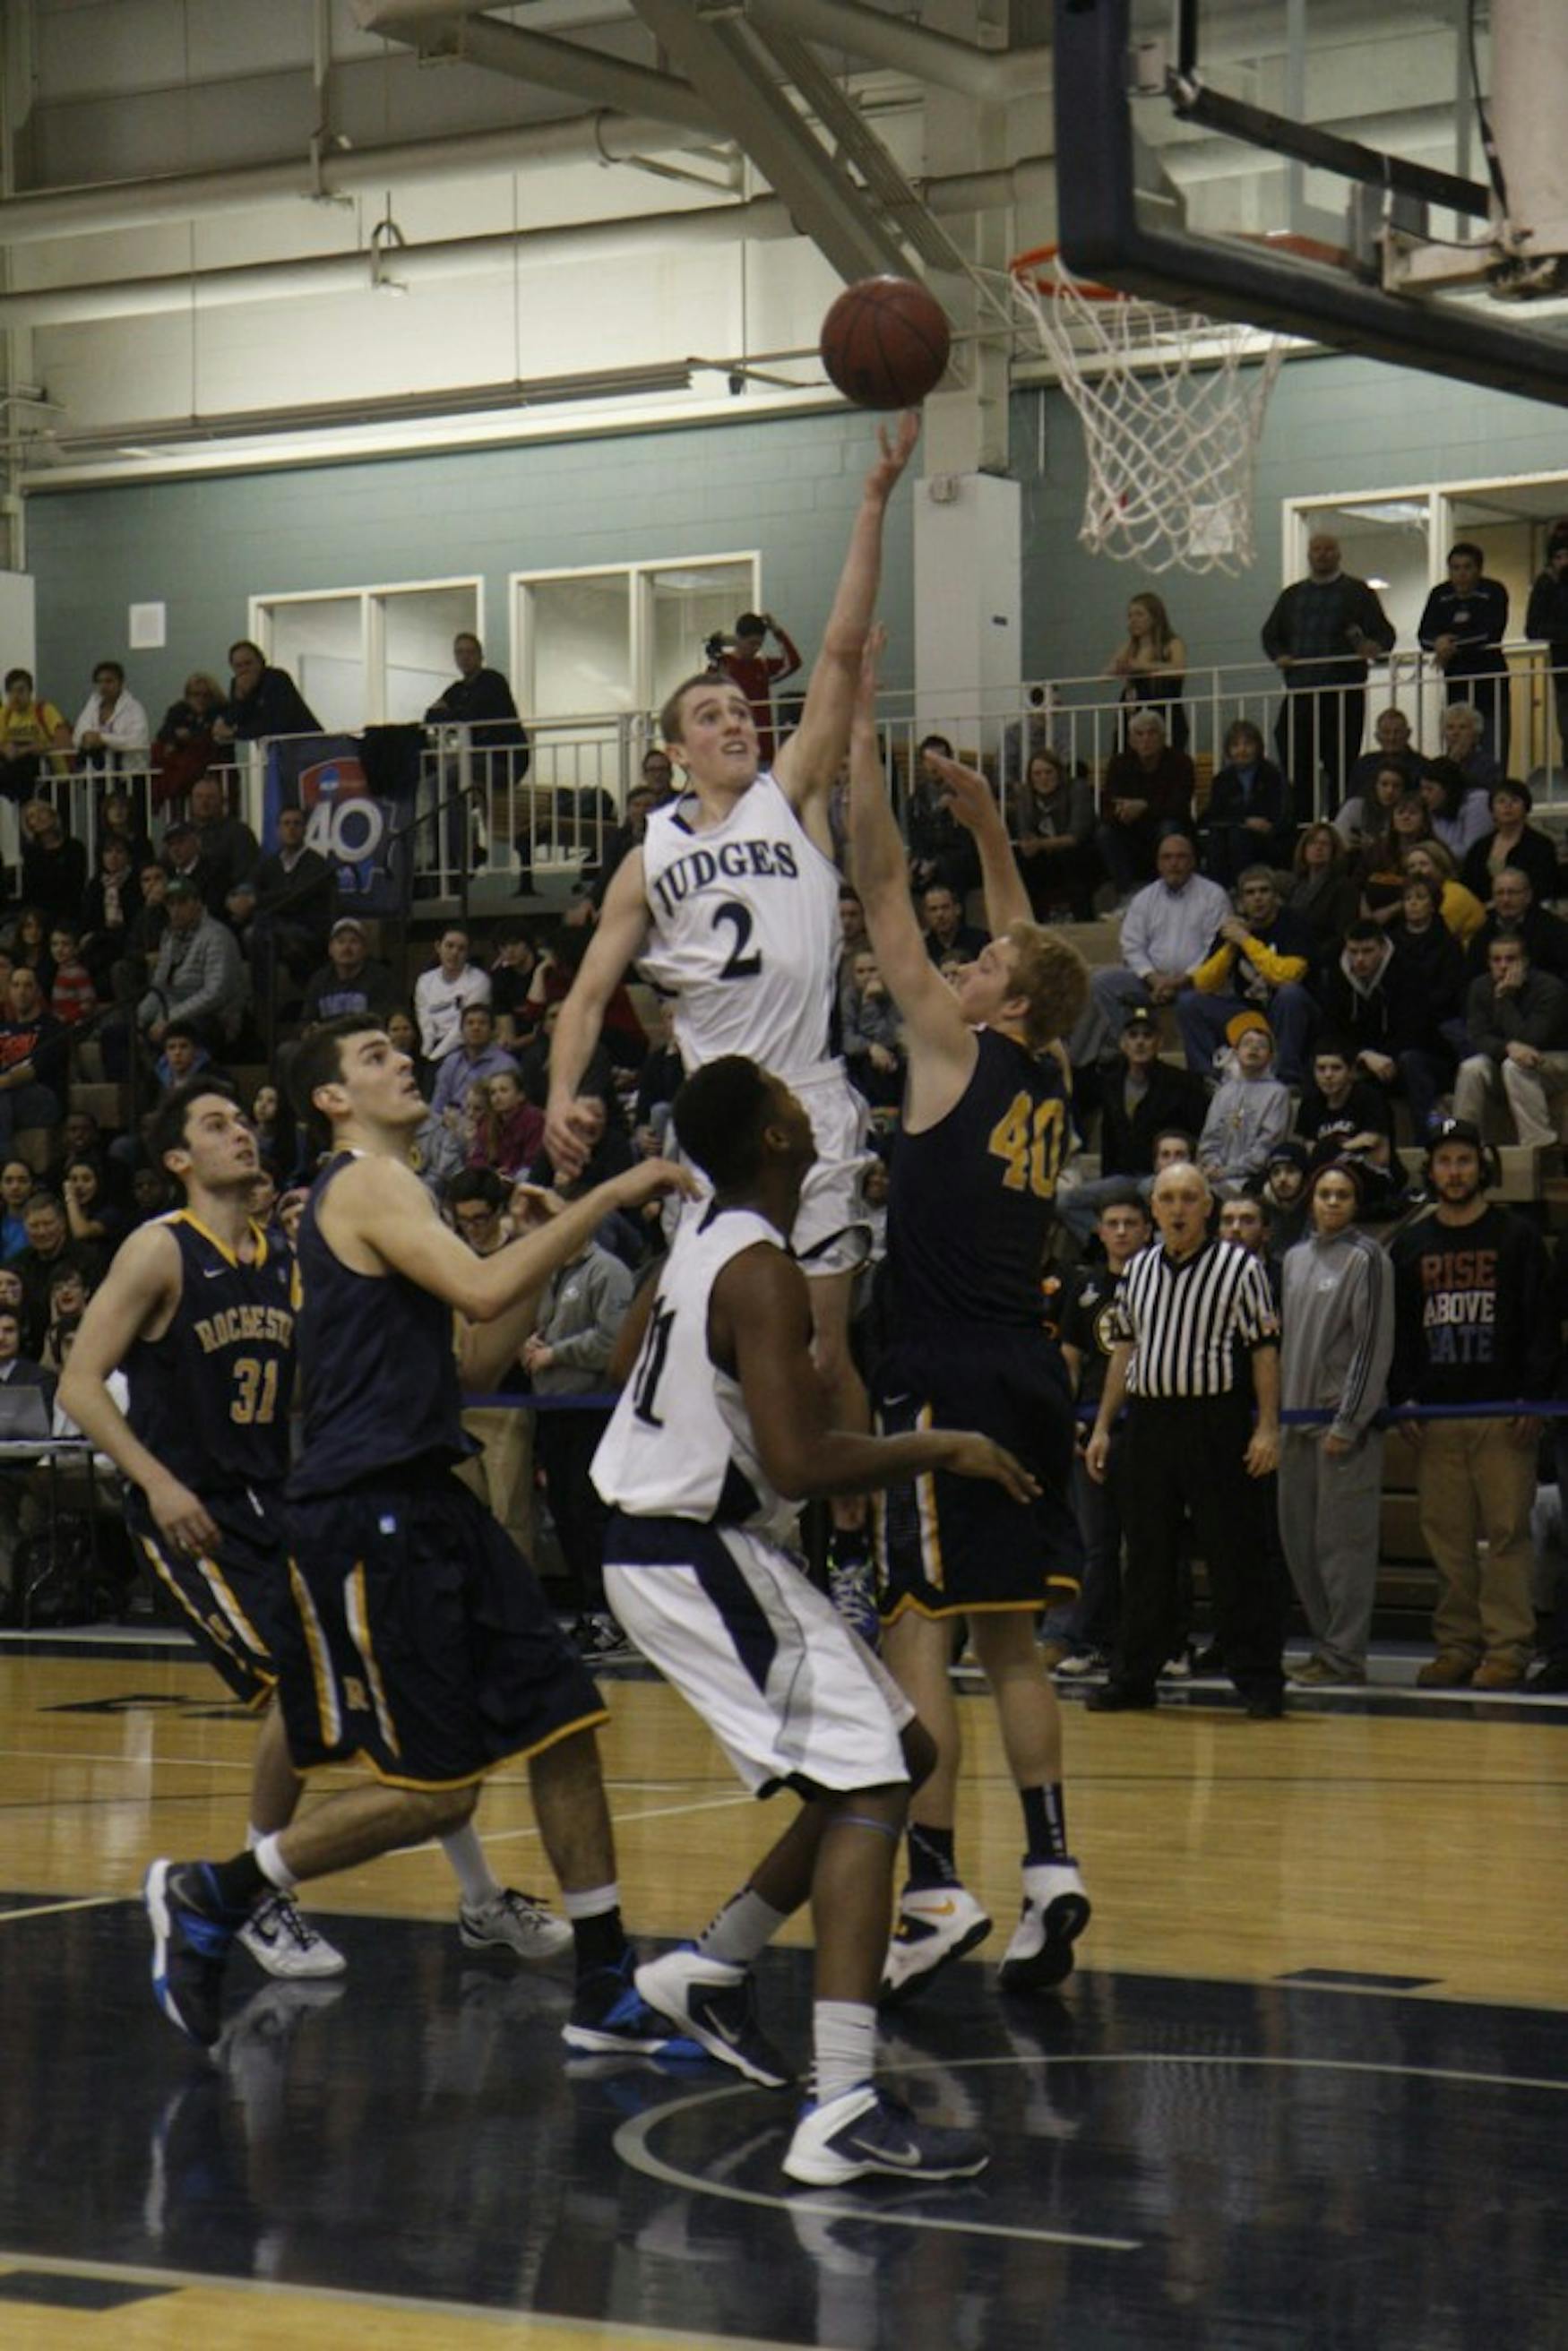 FINGER ROLL: Guard Colby Smith ‘16 attempts a layup over a University of Rochester defender in the team’s win on Jan 24.